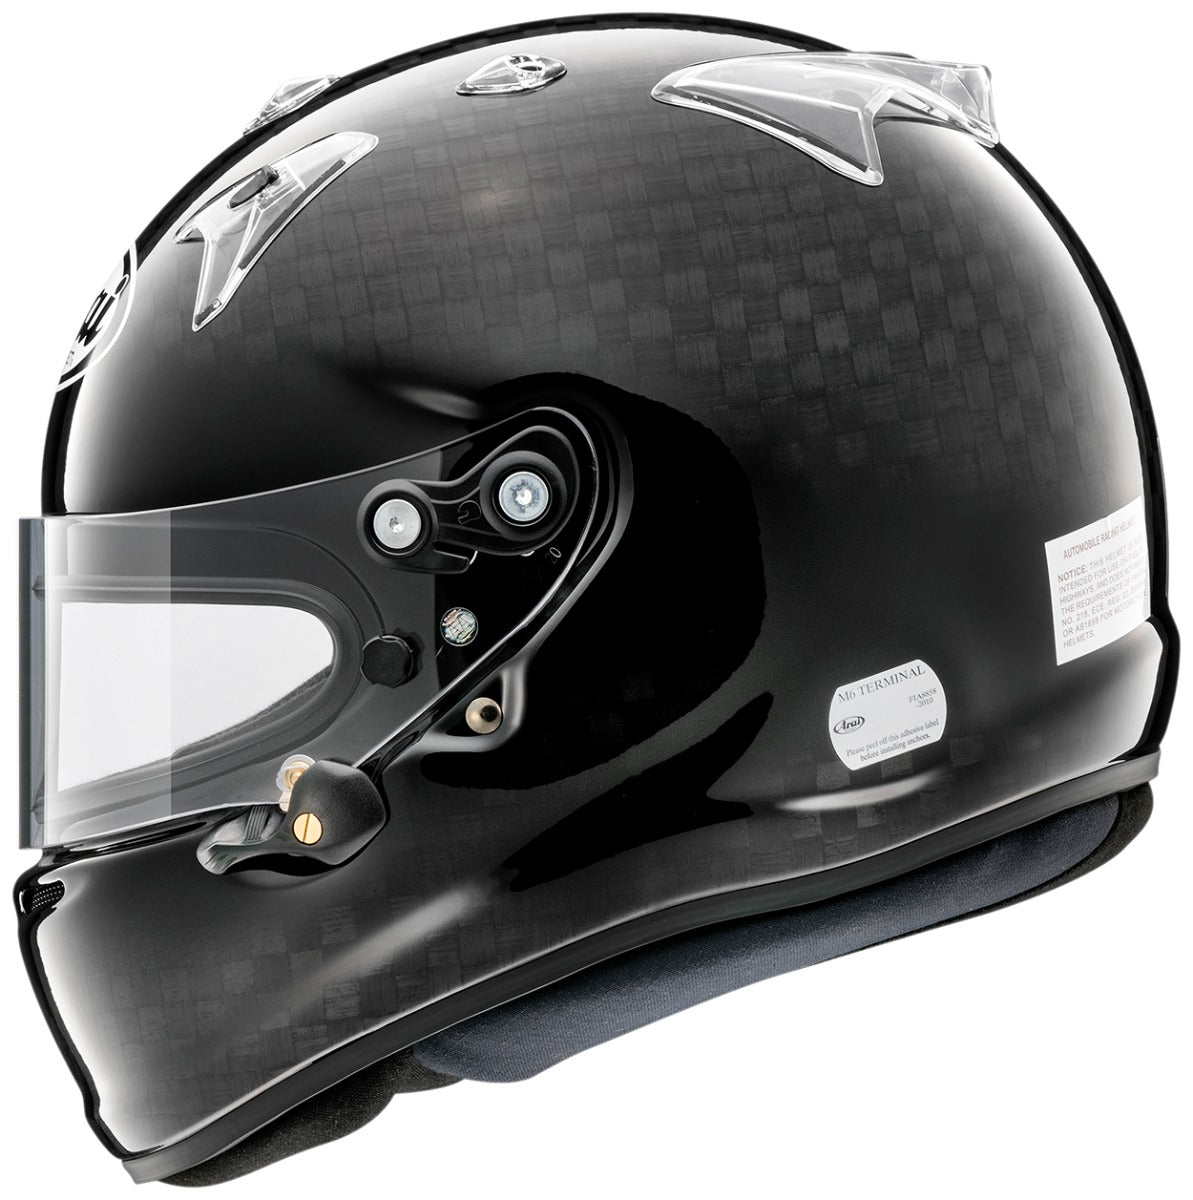 ARAI GP-7SRC ABP 8860-2018 CARBON FIBER HELMET IN STOCK WITH THE BIGGEST DISCOUNTS FOR THE LOWEST PRICE AND BEST DEAL ON A ARAI GP-7SRC ABP 8860-2018 CARBON FIBER HELMET PROFILE IMAGE